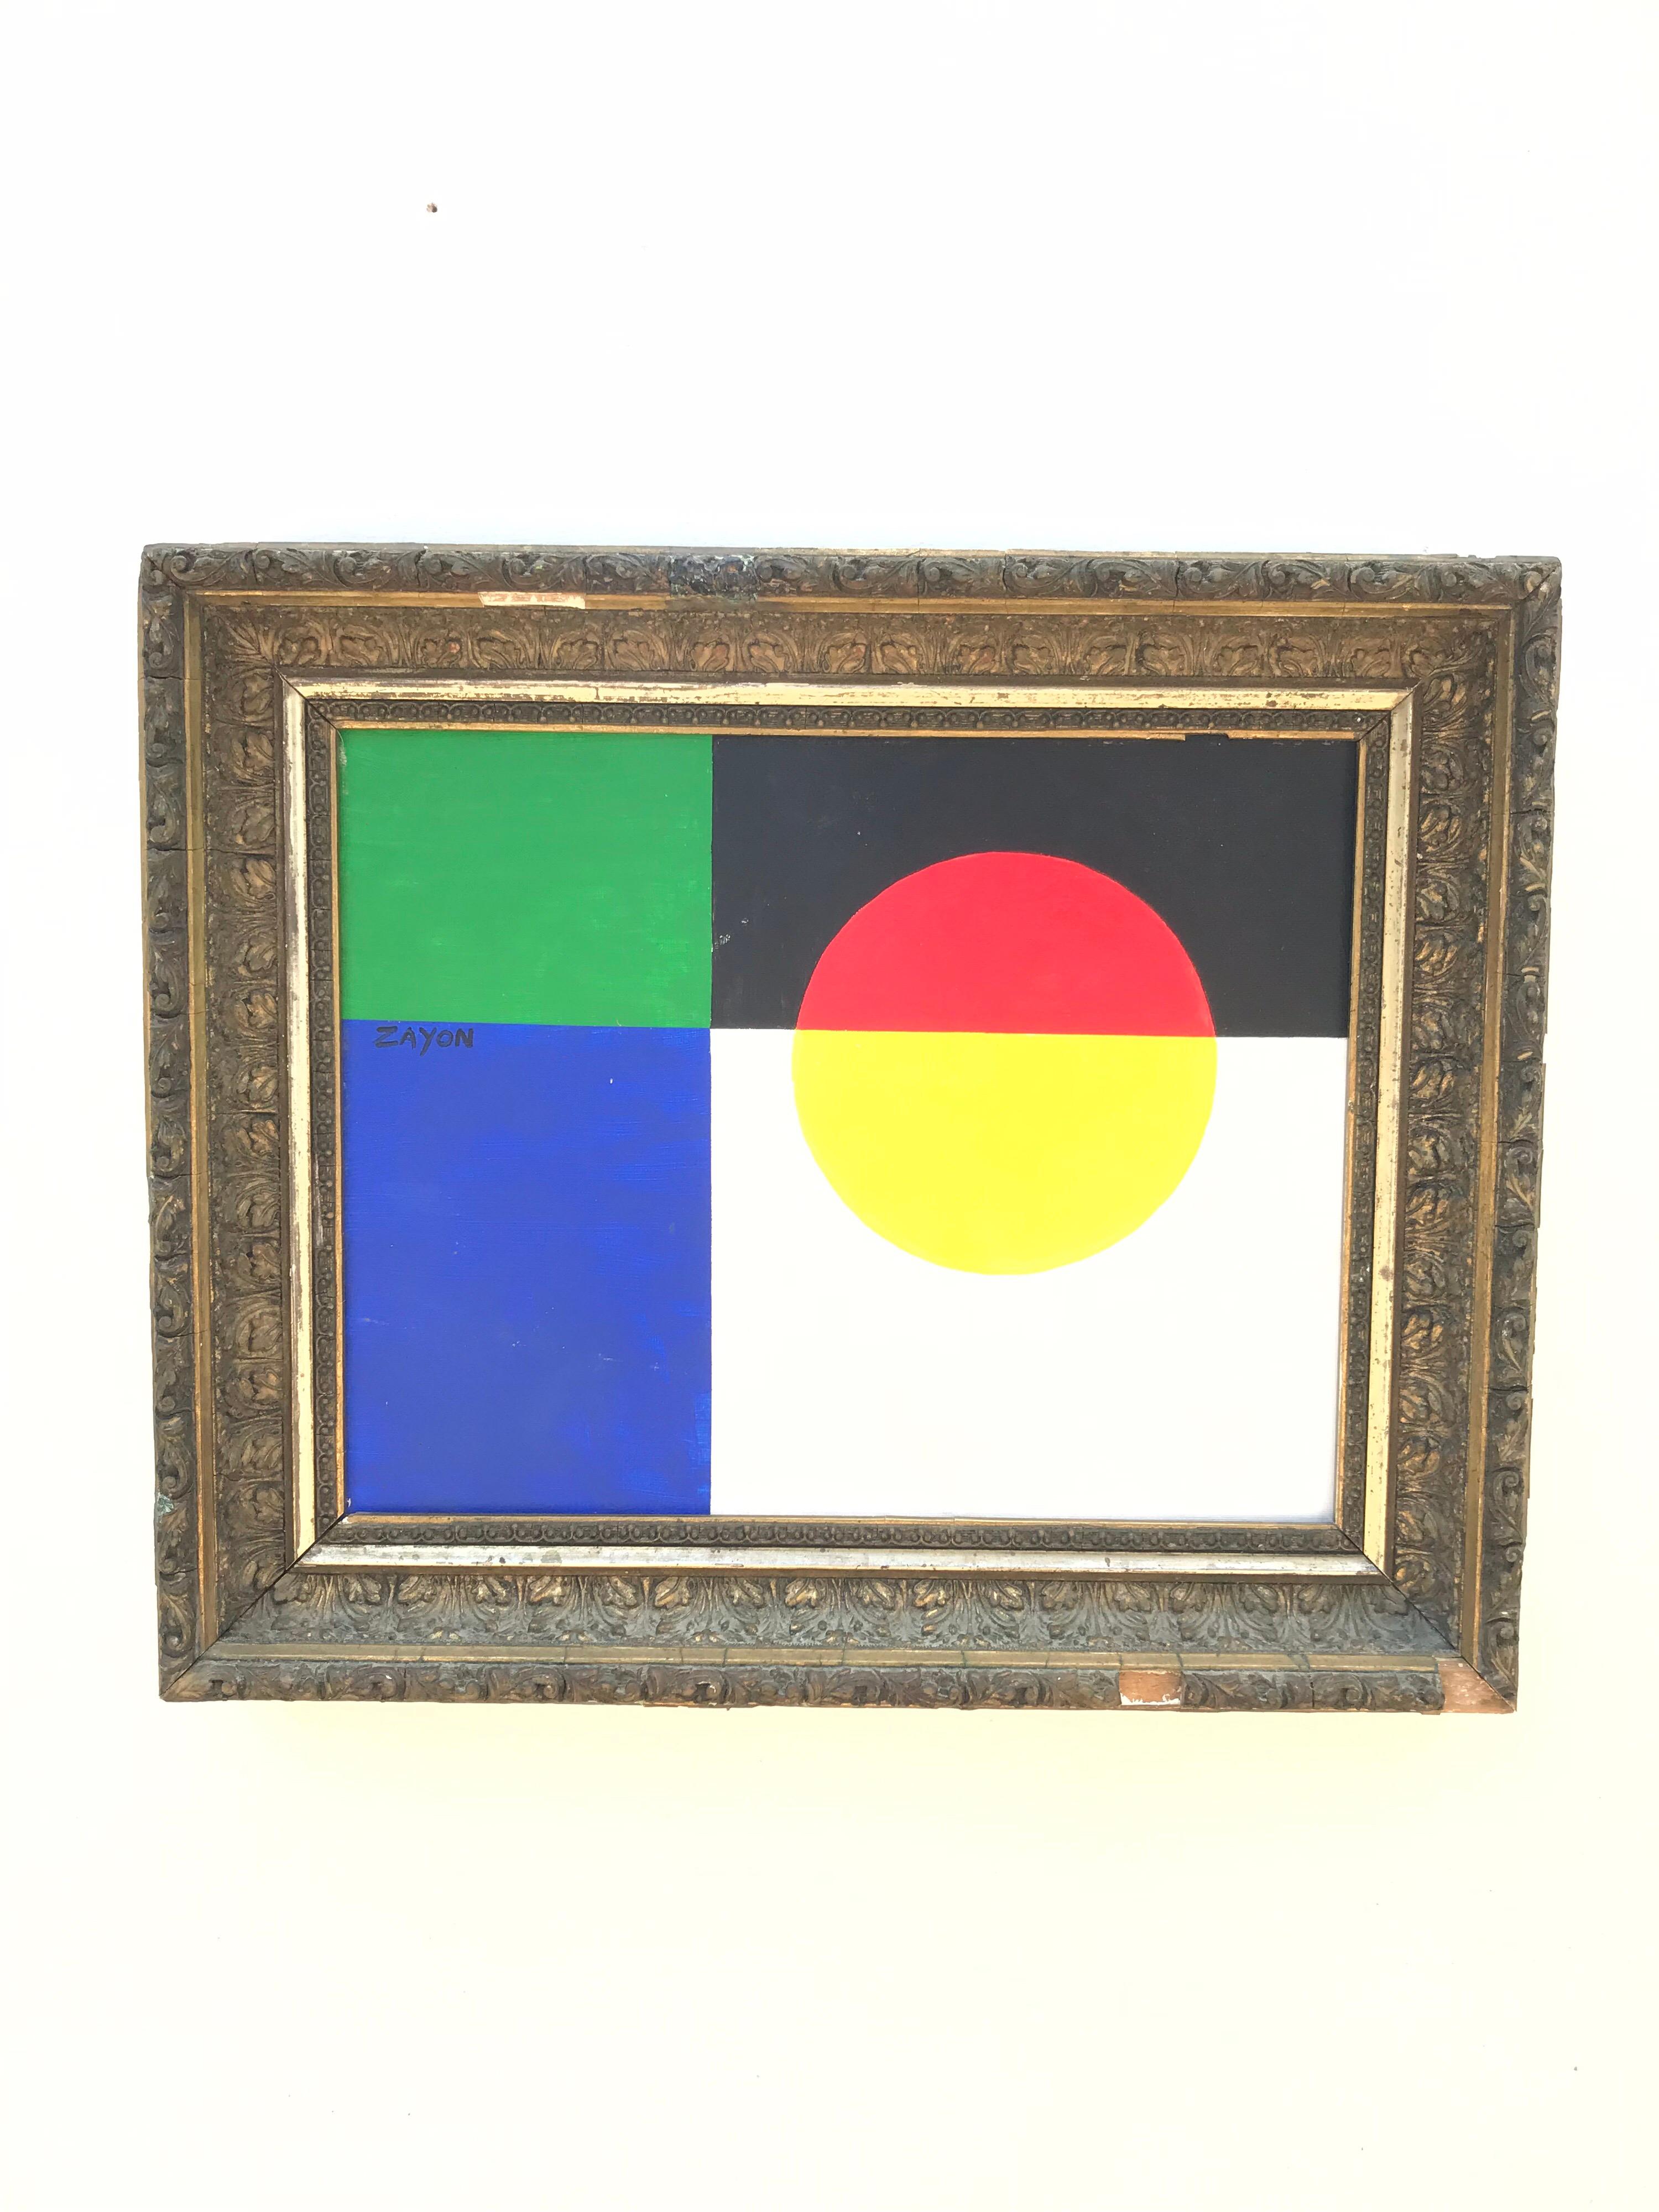 A pop art inspired color blocked painting on board housed in a fetching plaster and giltwood frame. The smaller work is by mid-20th century artist Seymour Zayon, a prolific yet simple painter.
 